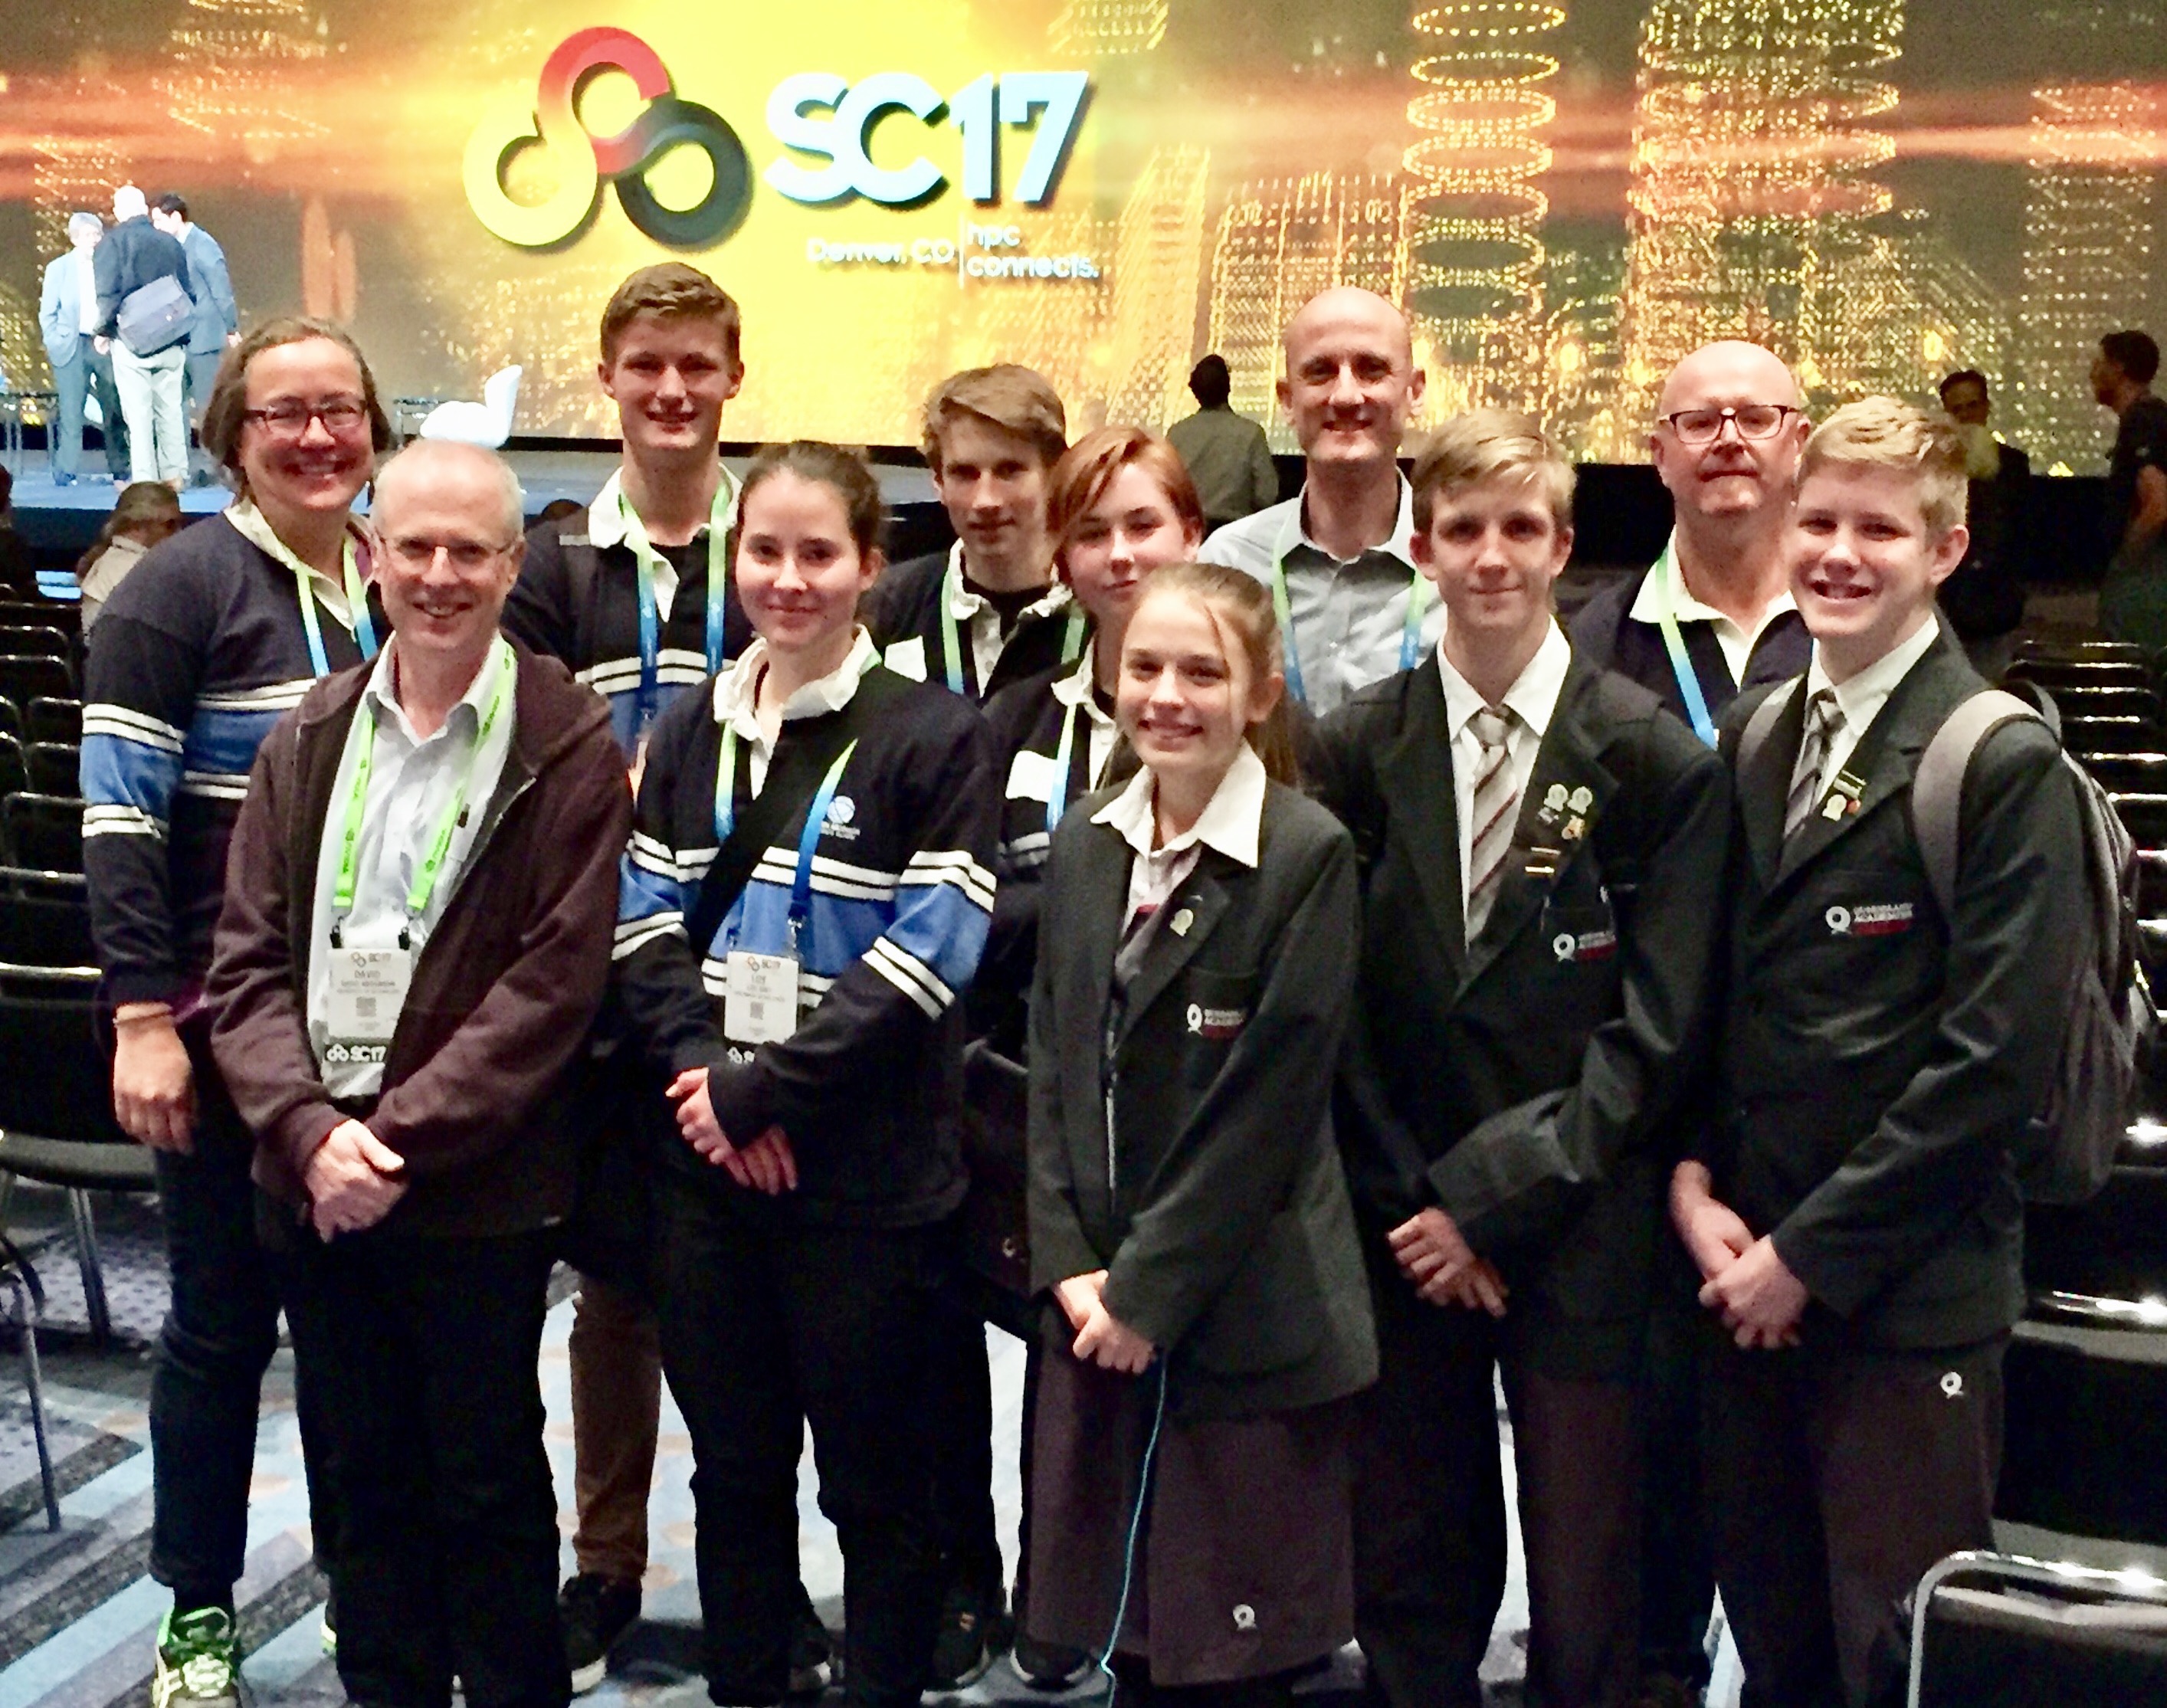 Prof. David Abramson (far left, front) with the JMSS and QASMT students and their chaperones at SC17.